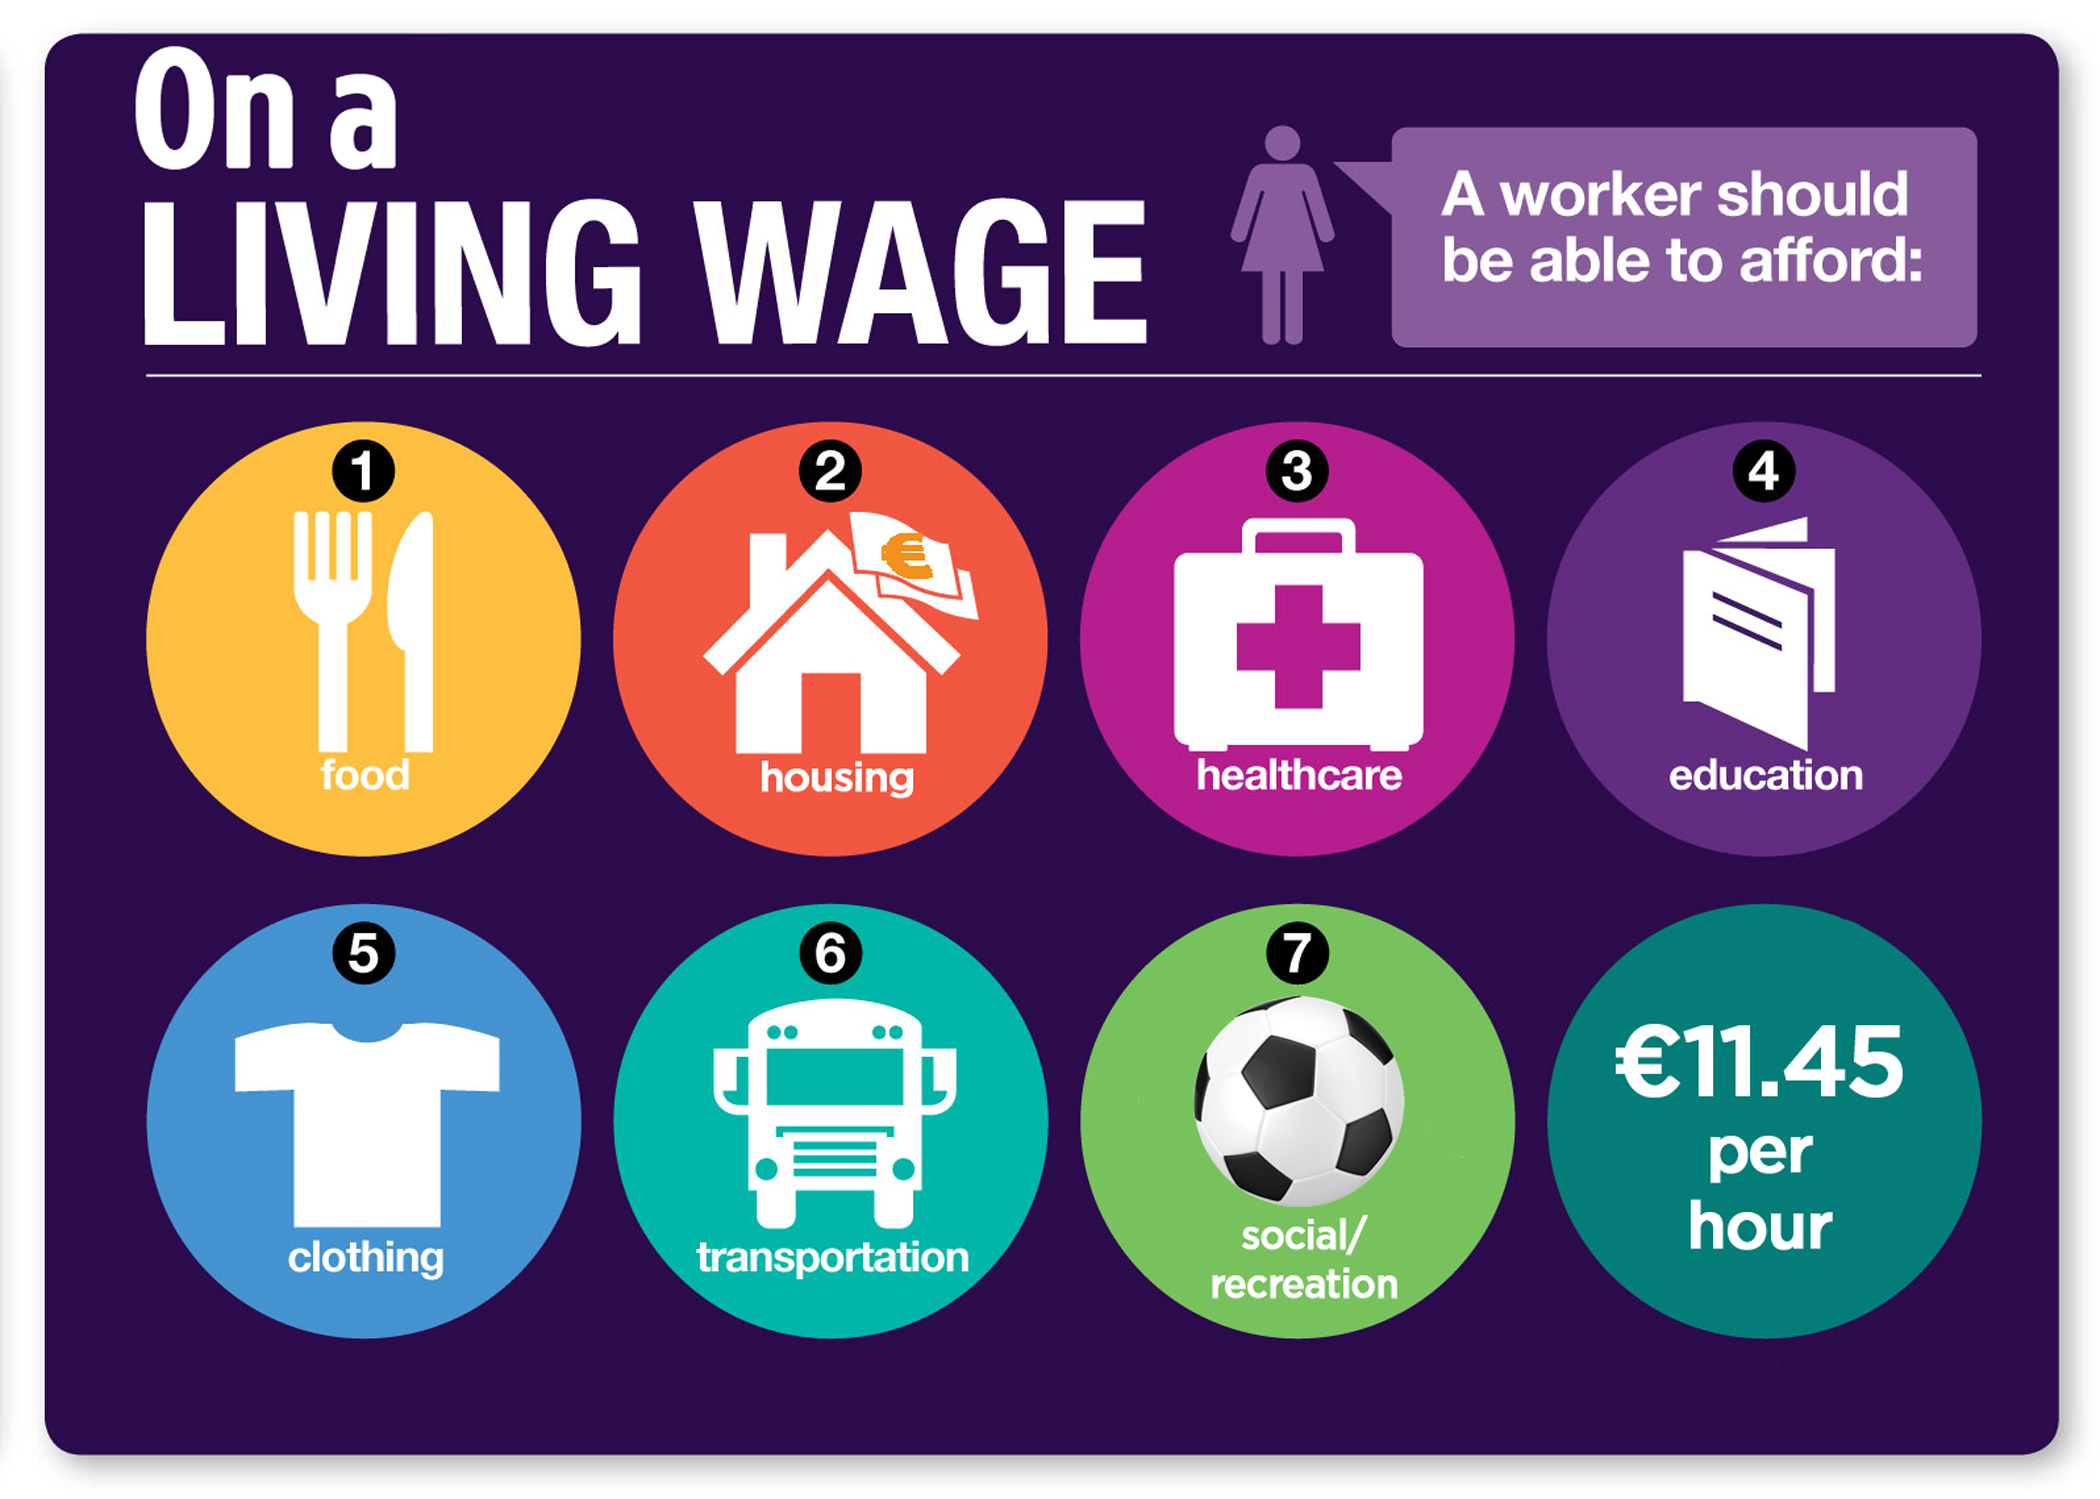 The Living Wage Technical Group has calculated that €11.45 represents a figure which allows employees to afford the essentials of life